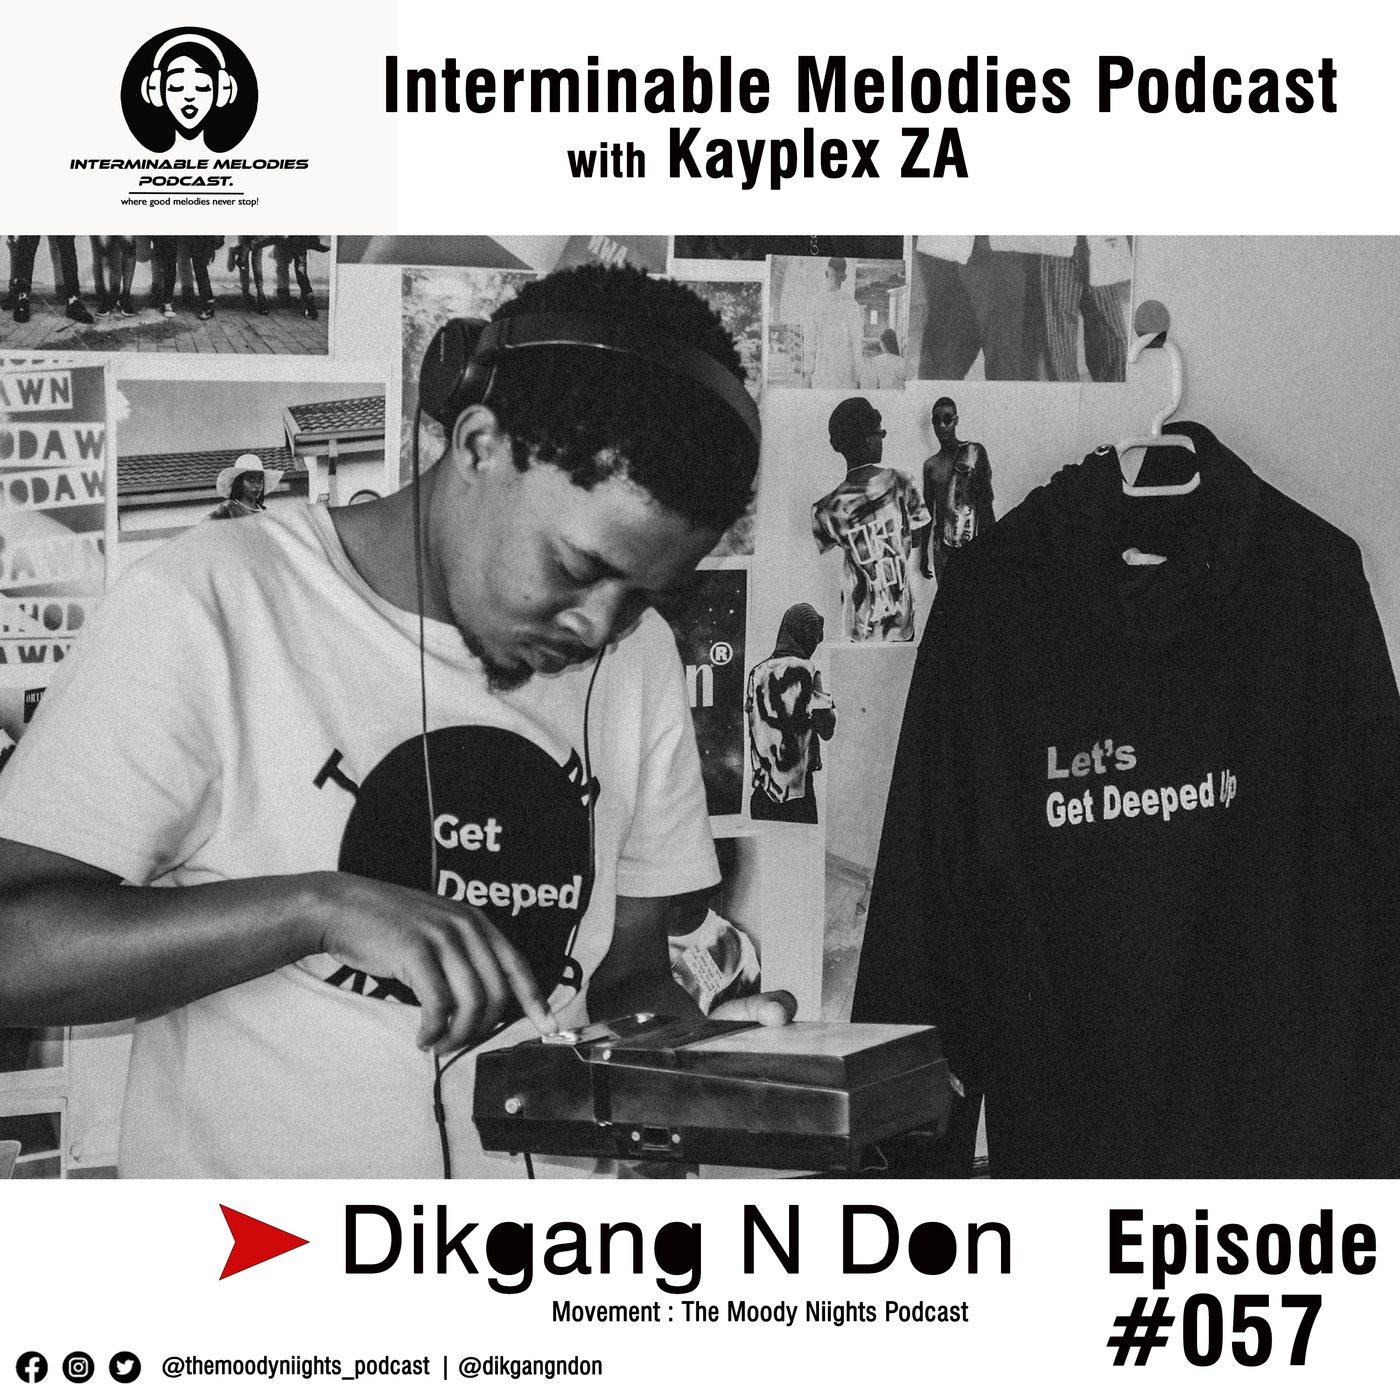 Episode 057 -  Dikgang N Don (The Moody Niights Podcast)